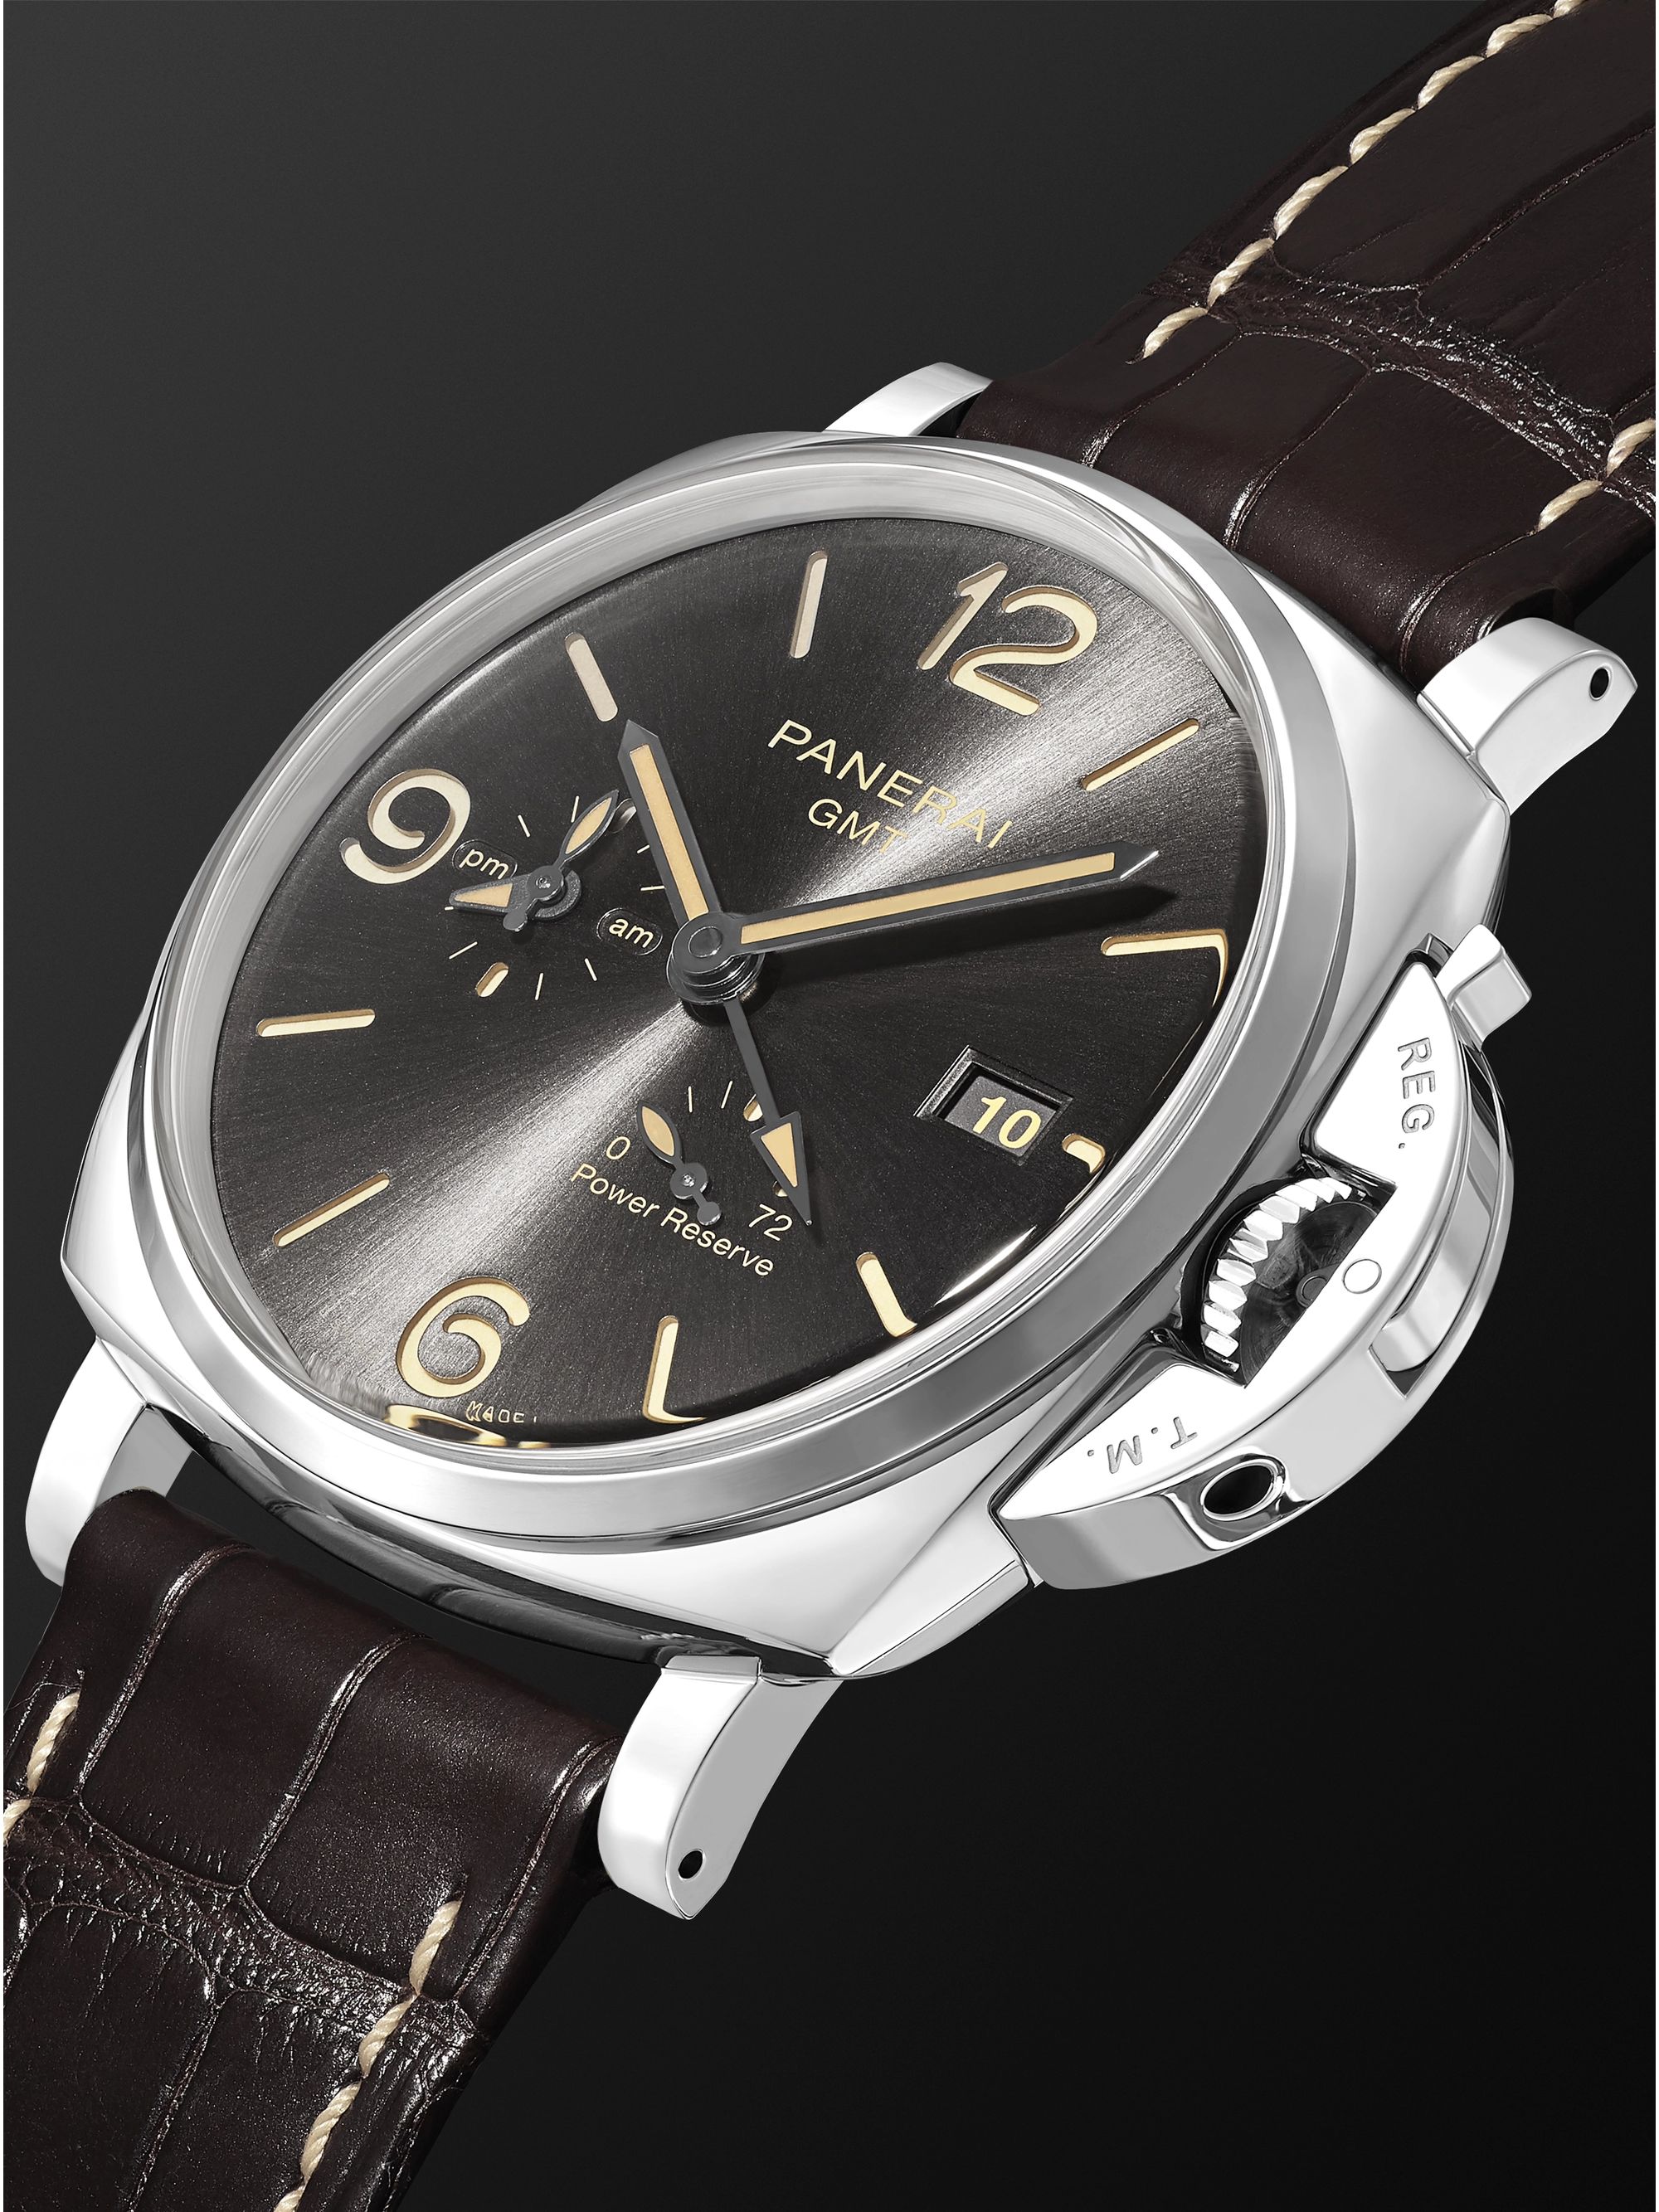 PANERAI Luminor Due GMT Power Reserve Automatic 45mm Stainless Steel and Alligator Watch, Ref. No. PAM00944